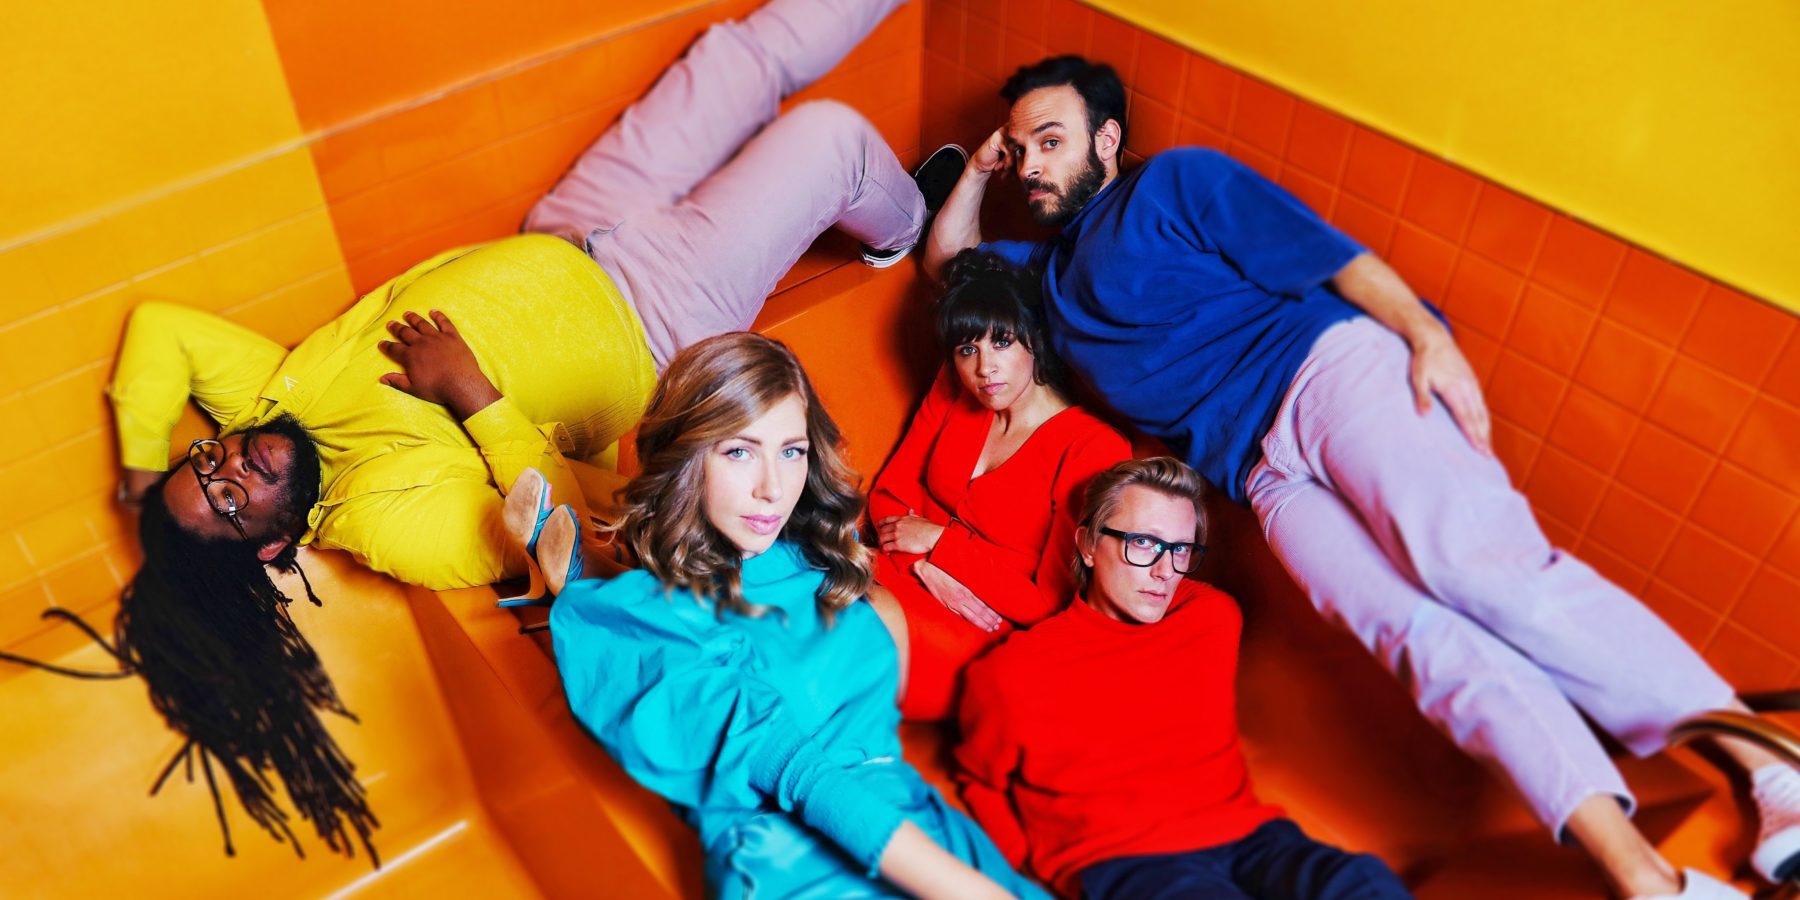 Lake Street Dive – SOLD OUT